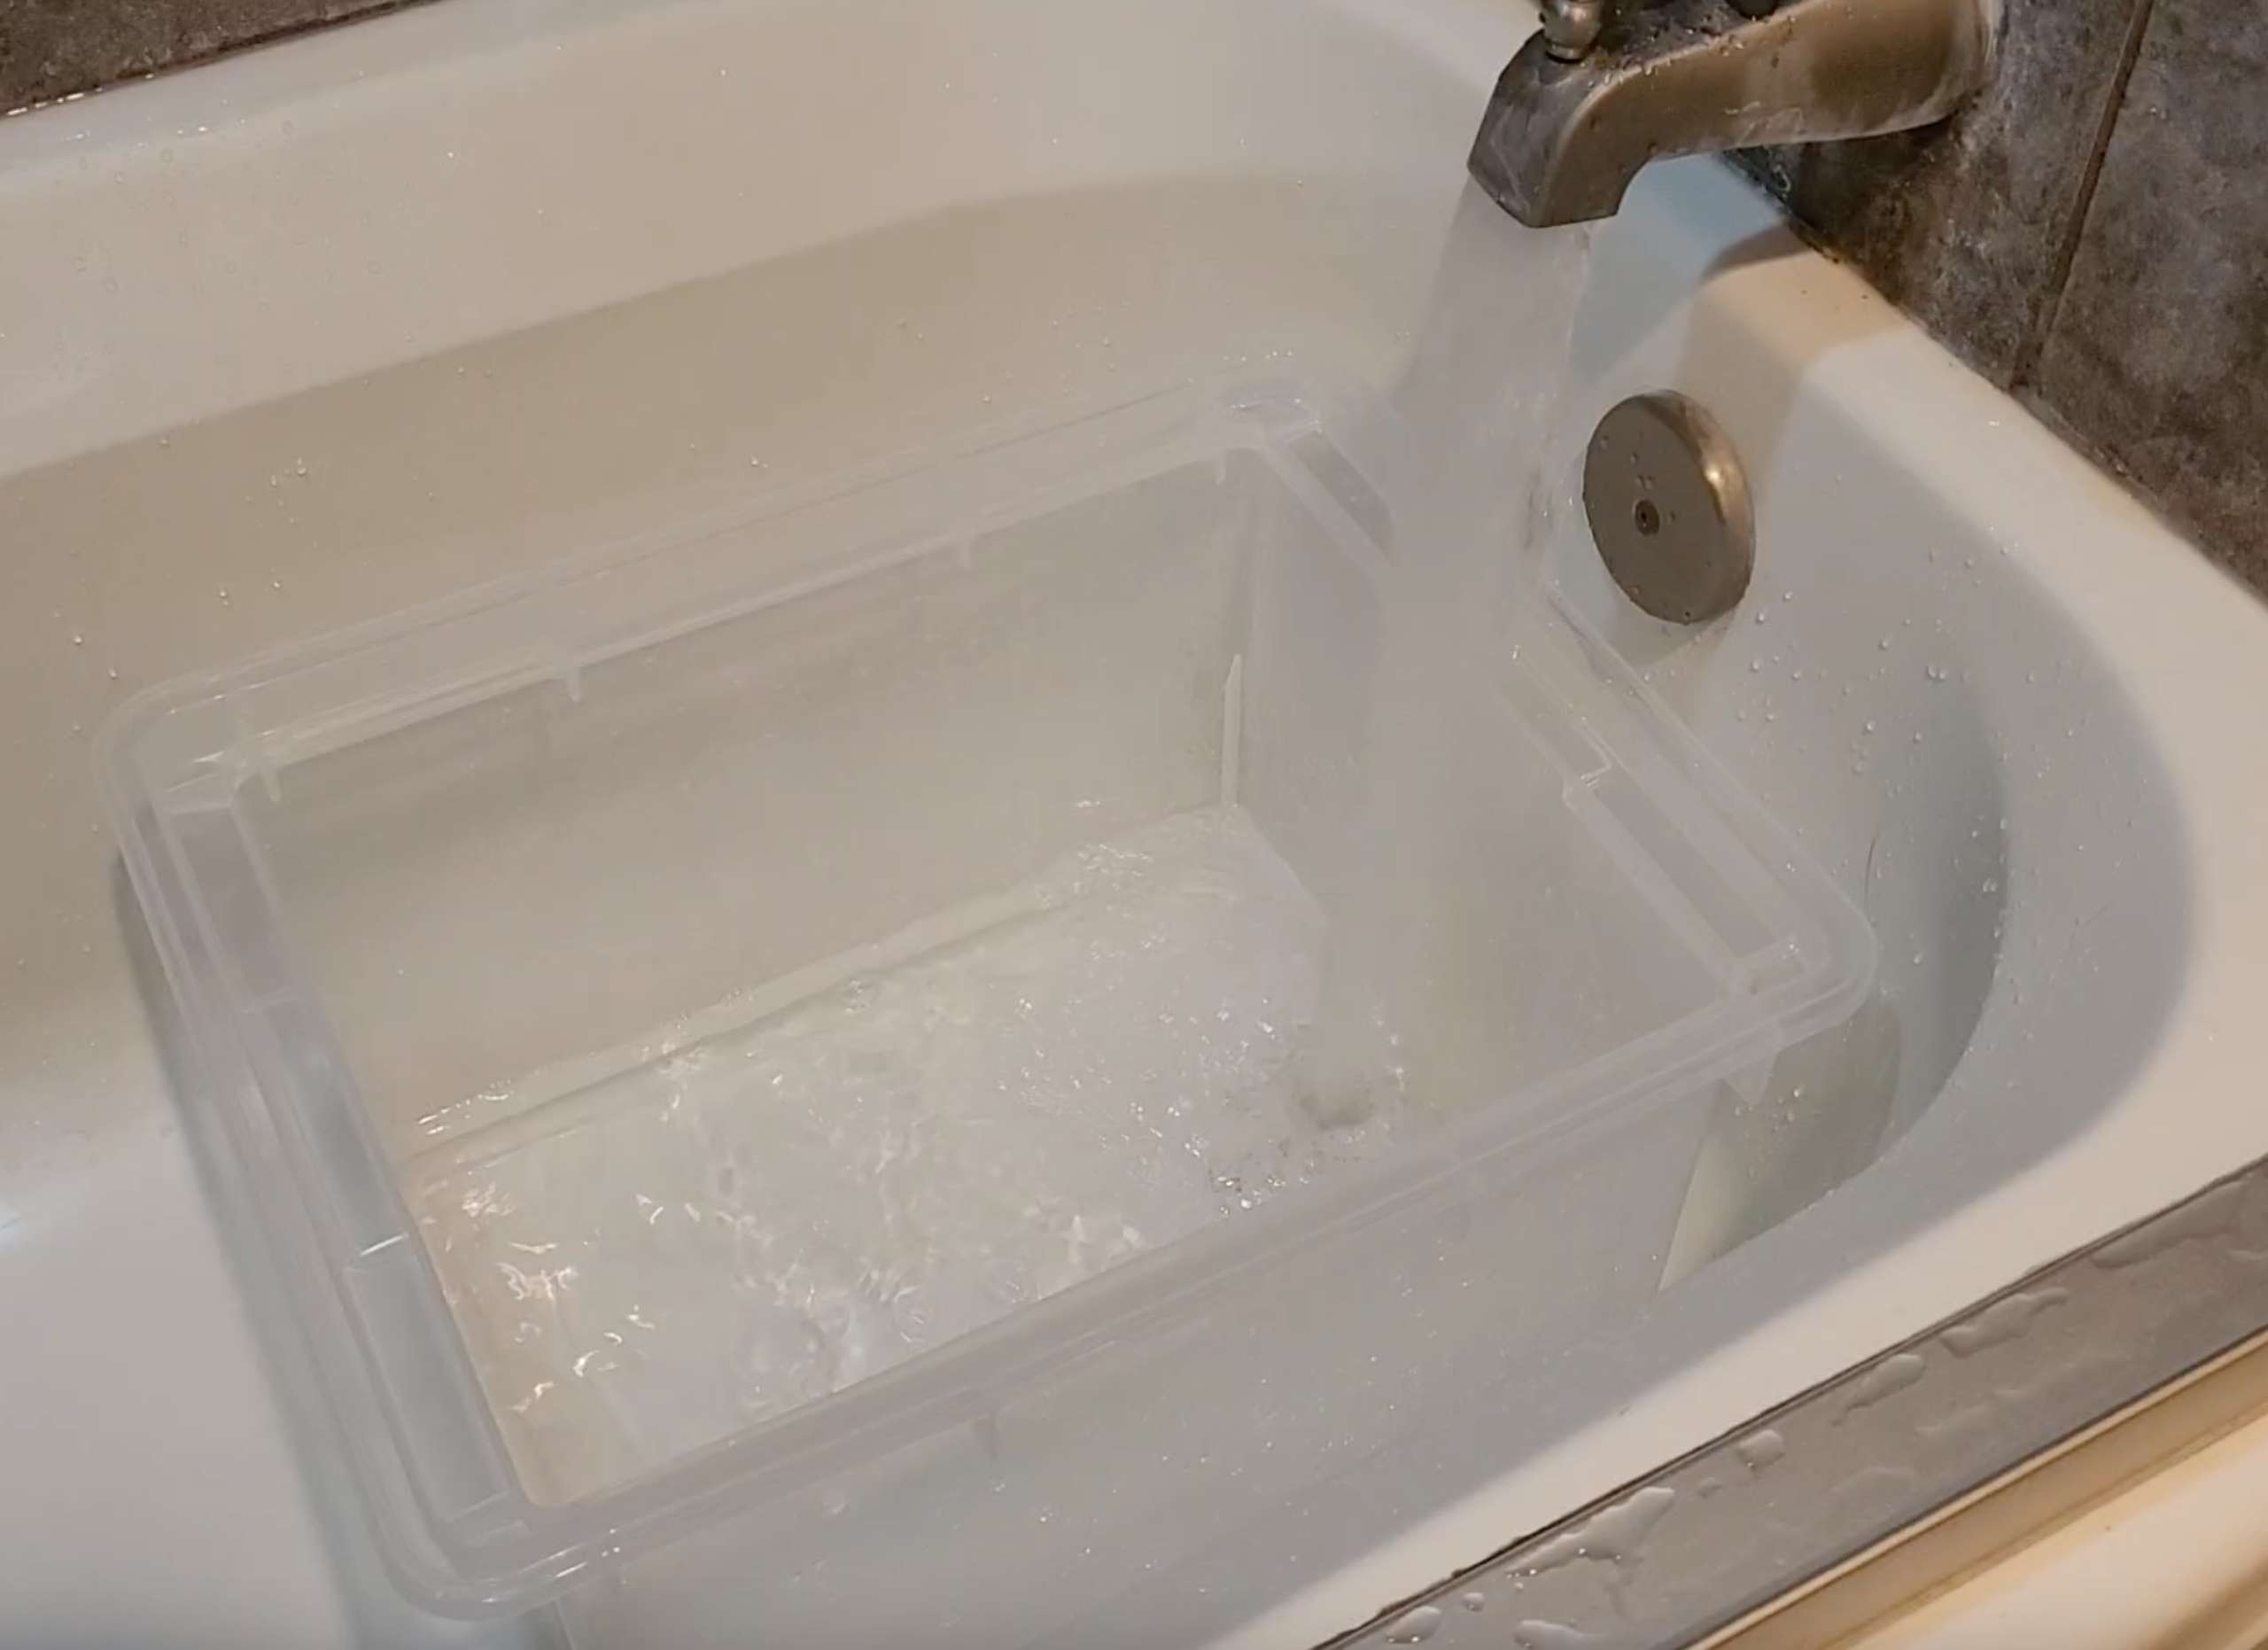 photo of a basin being filled with lukewarm water